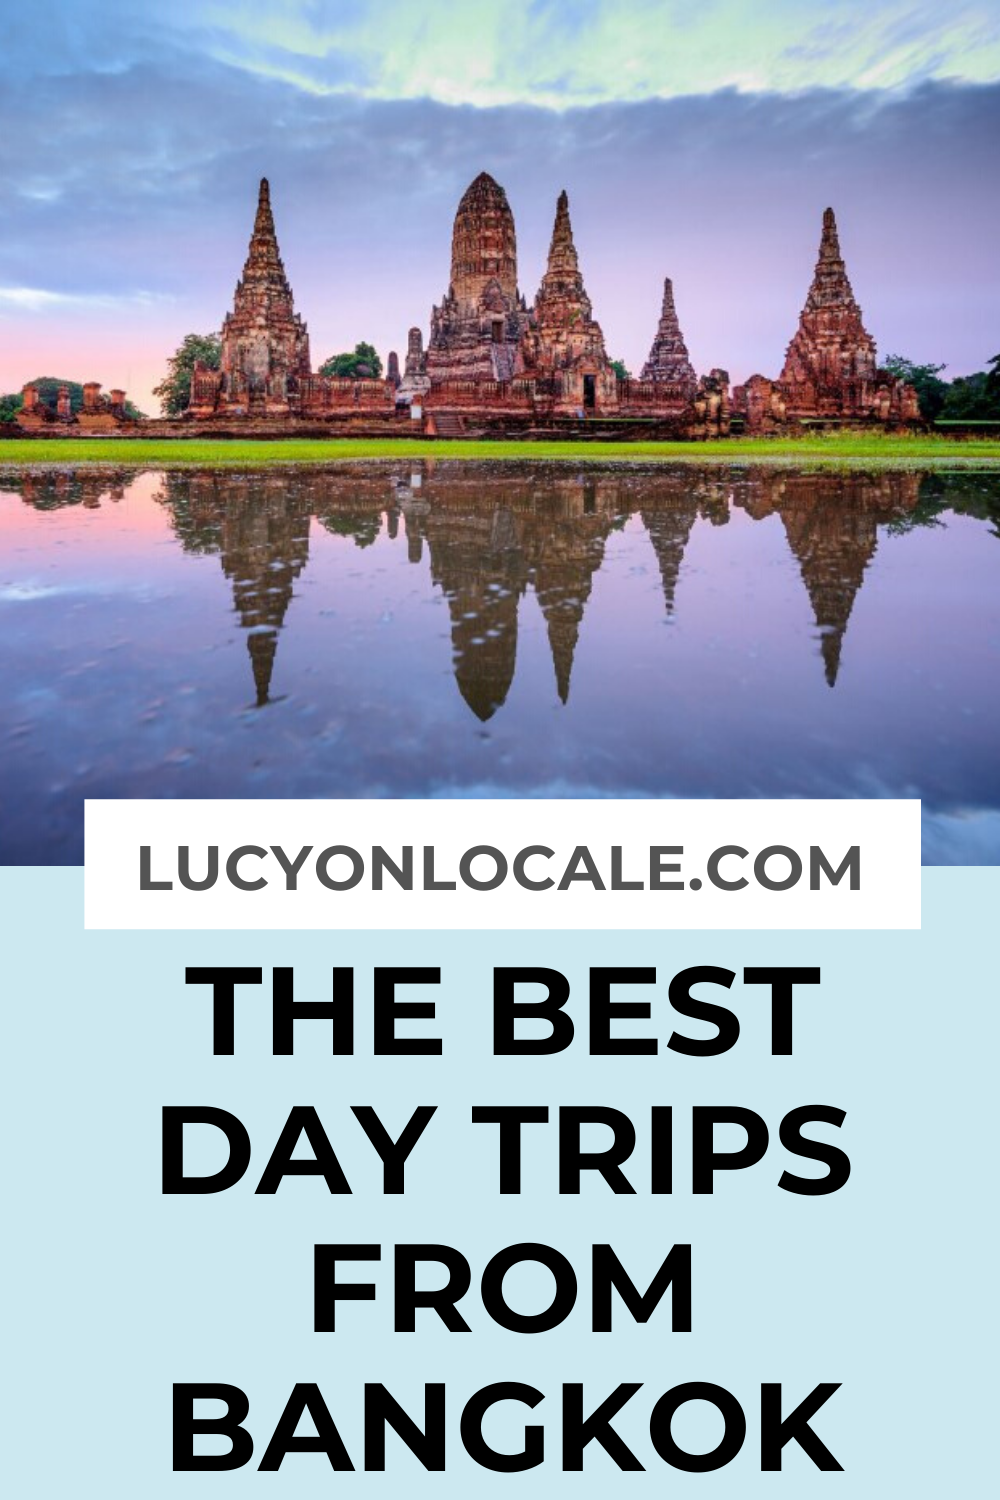 The Best Day Trips from Bangkok in 2020 Thailand travel destinations